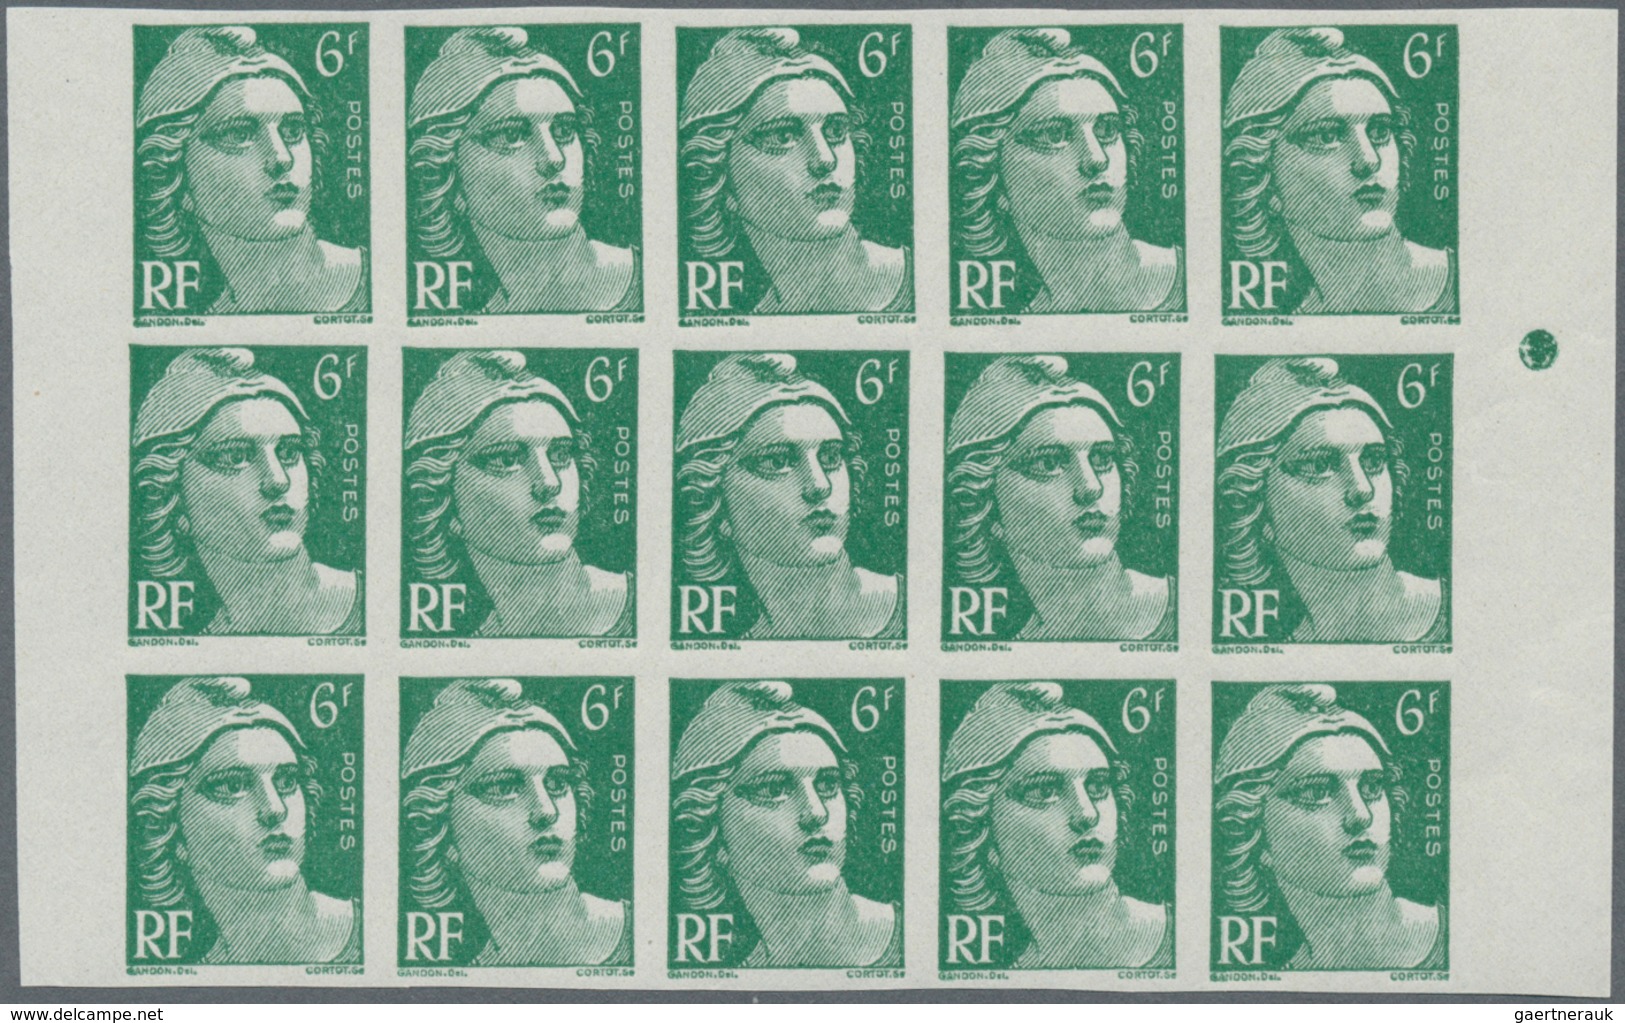 Frankreich: 1951, definitive issue Marianne (Gandon)‘ complete set of five in IMPERFORATE blocks of